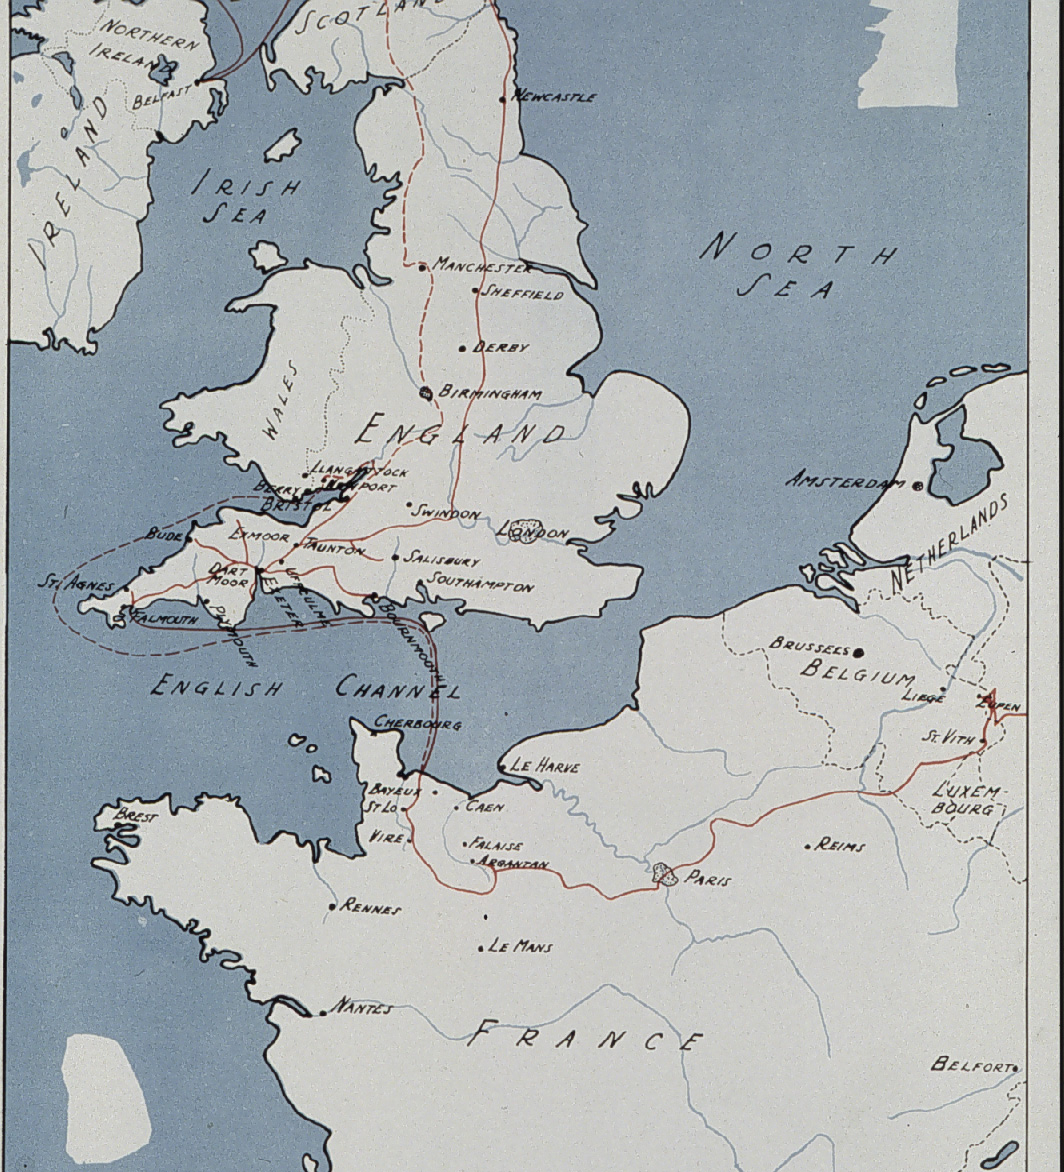 Route of 17th Field Artillery Observation Battalion through England and France